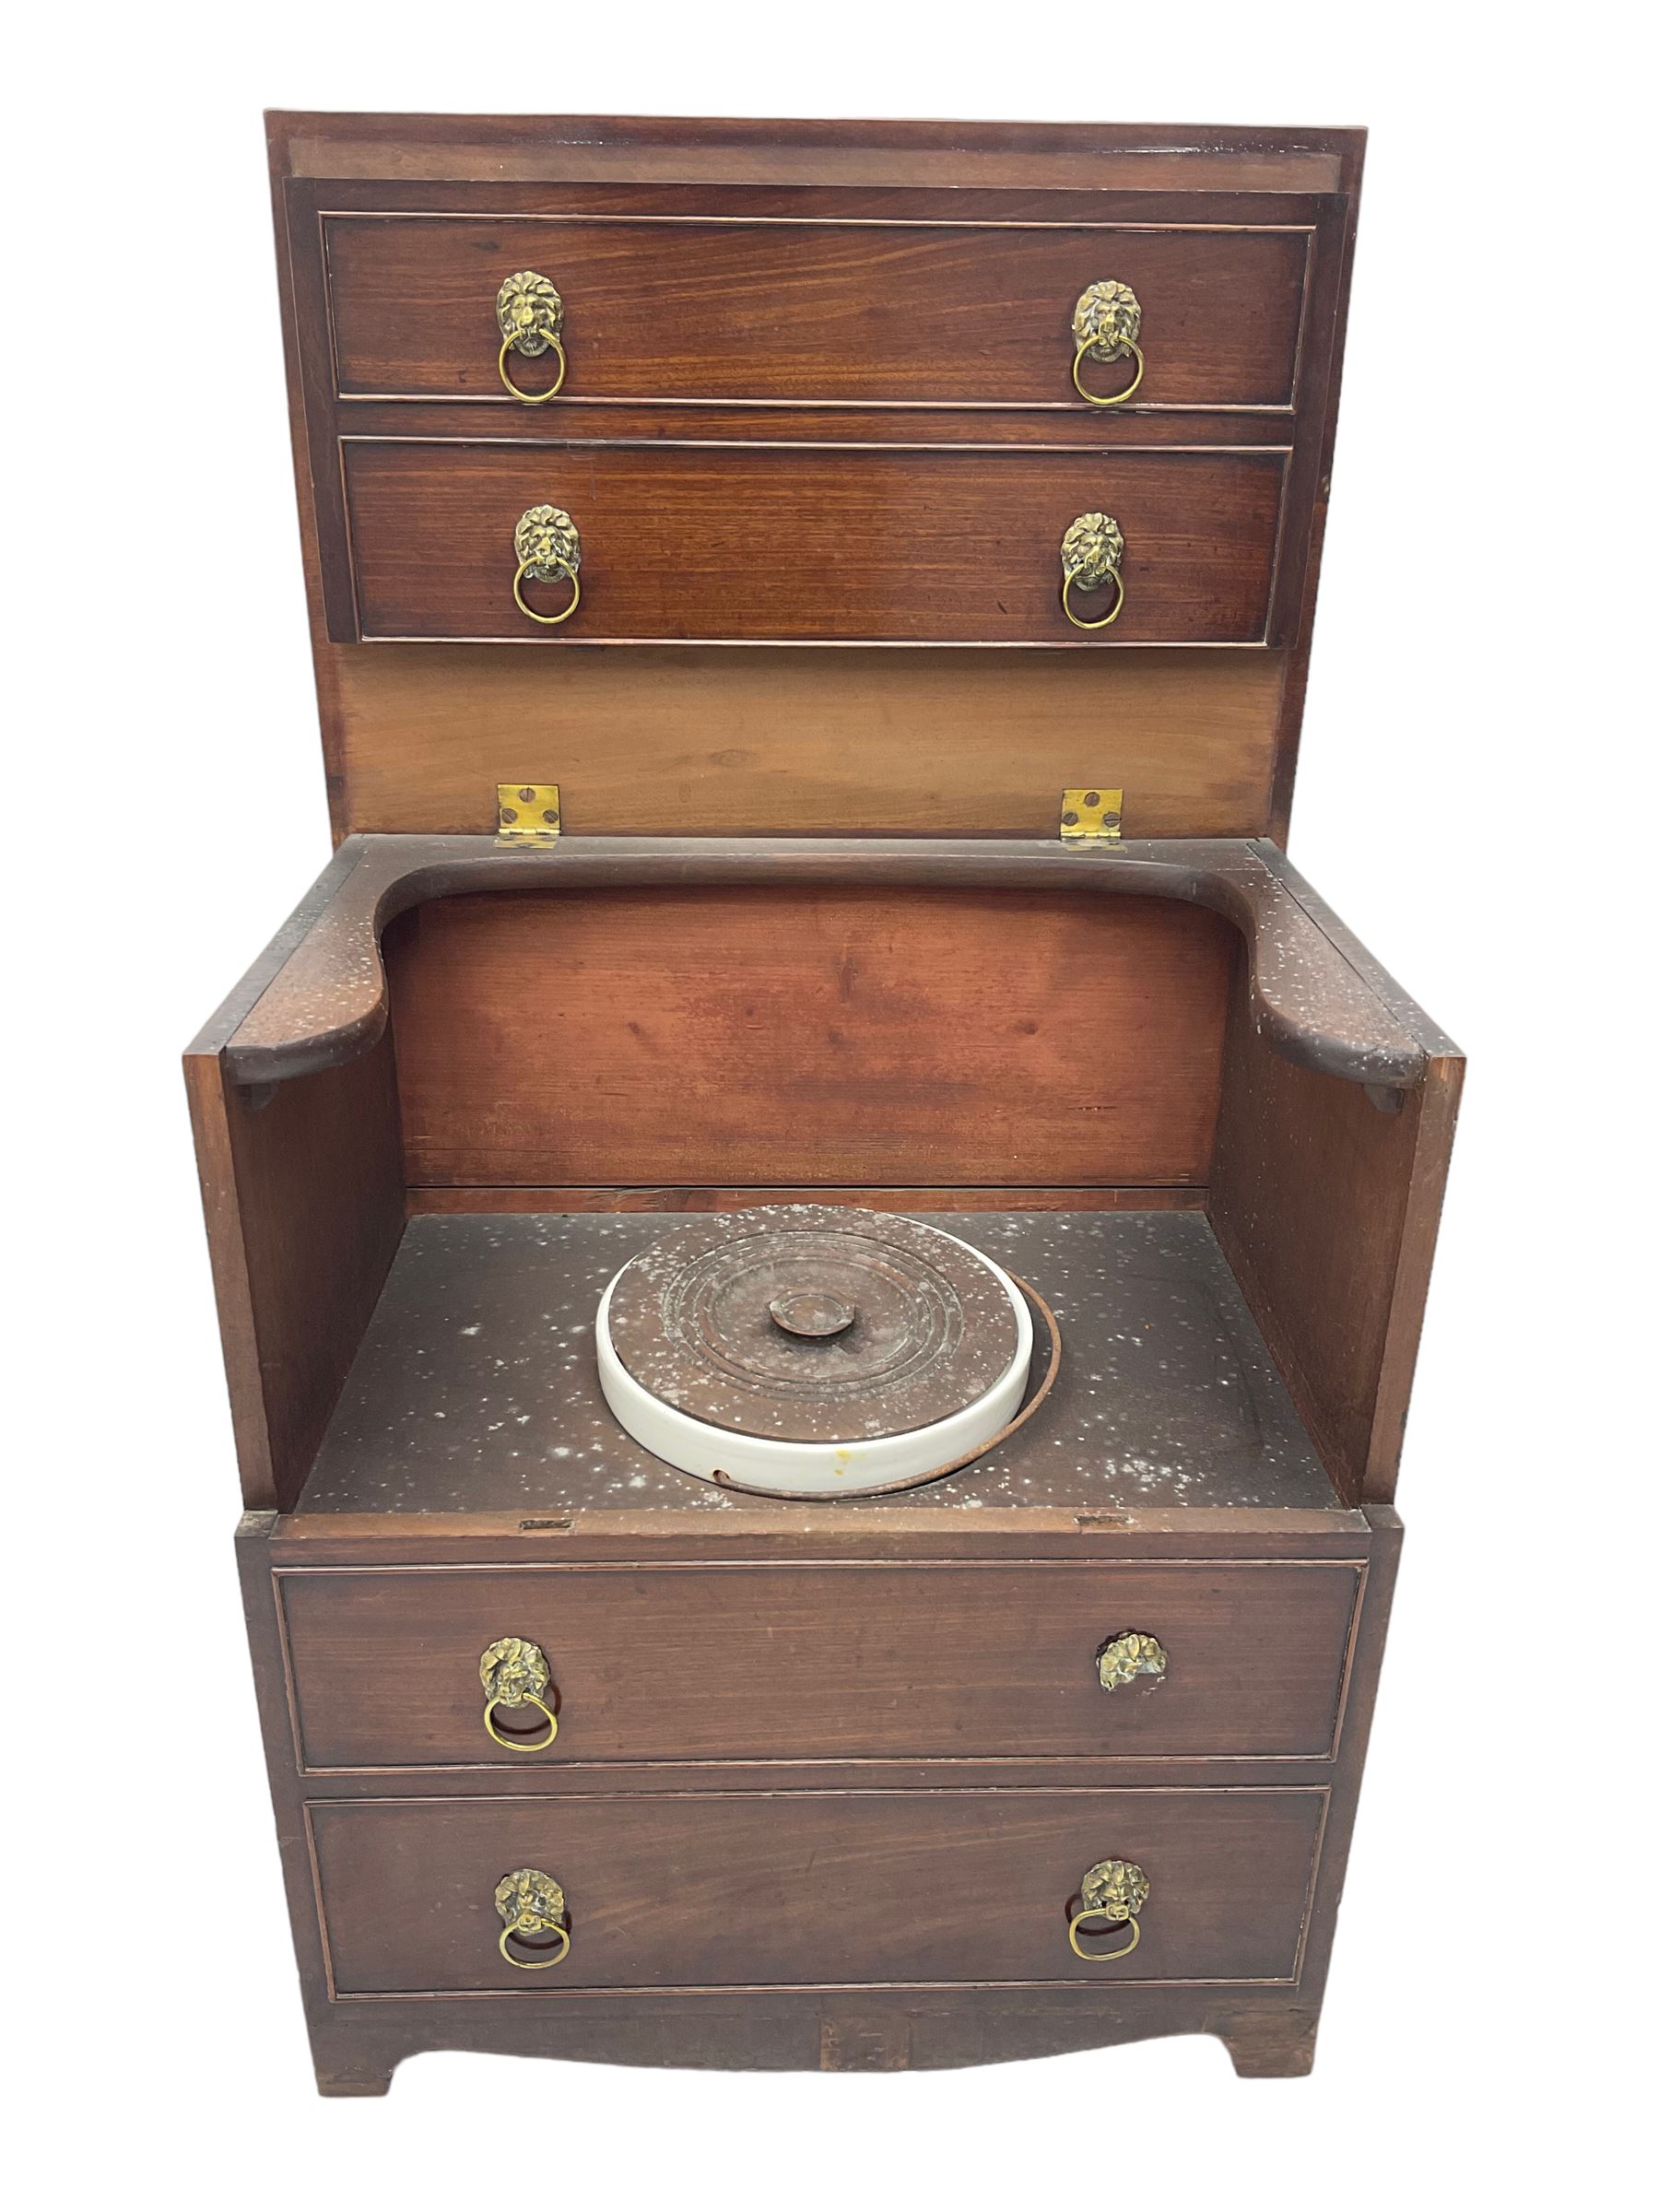 Early 19th century mahogany commode chest - Image 5 of 7